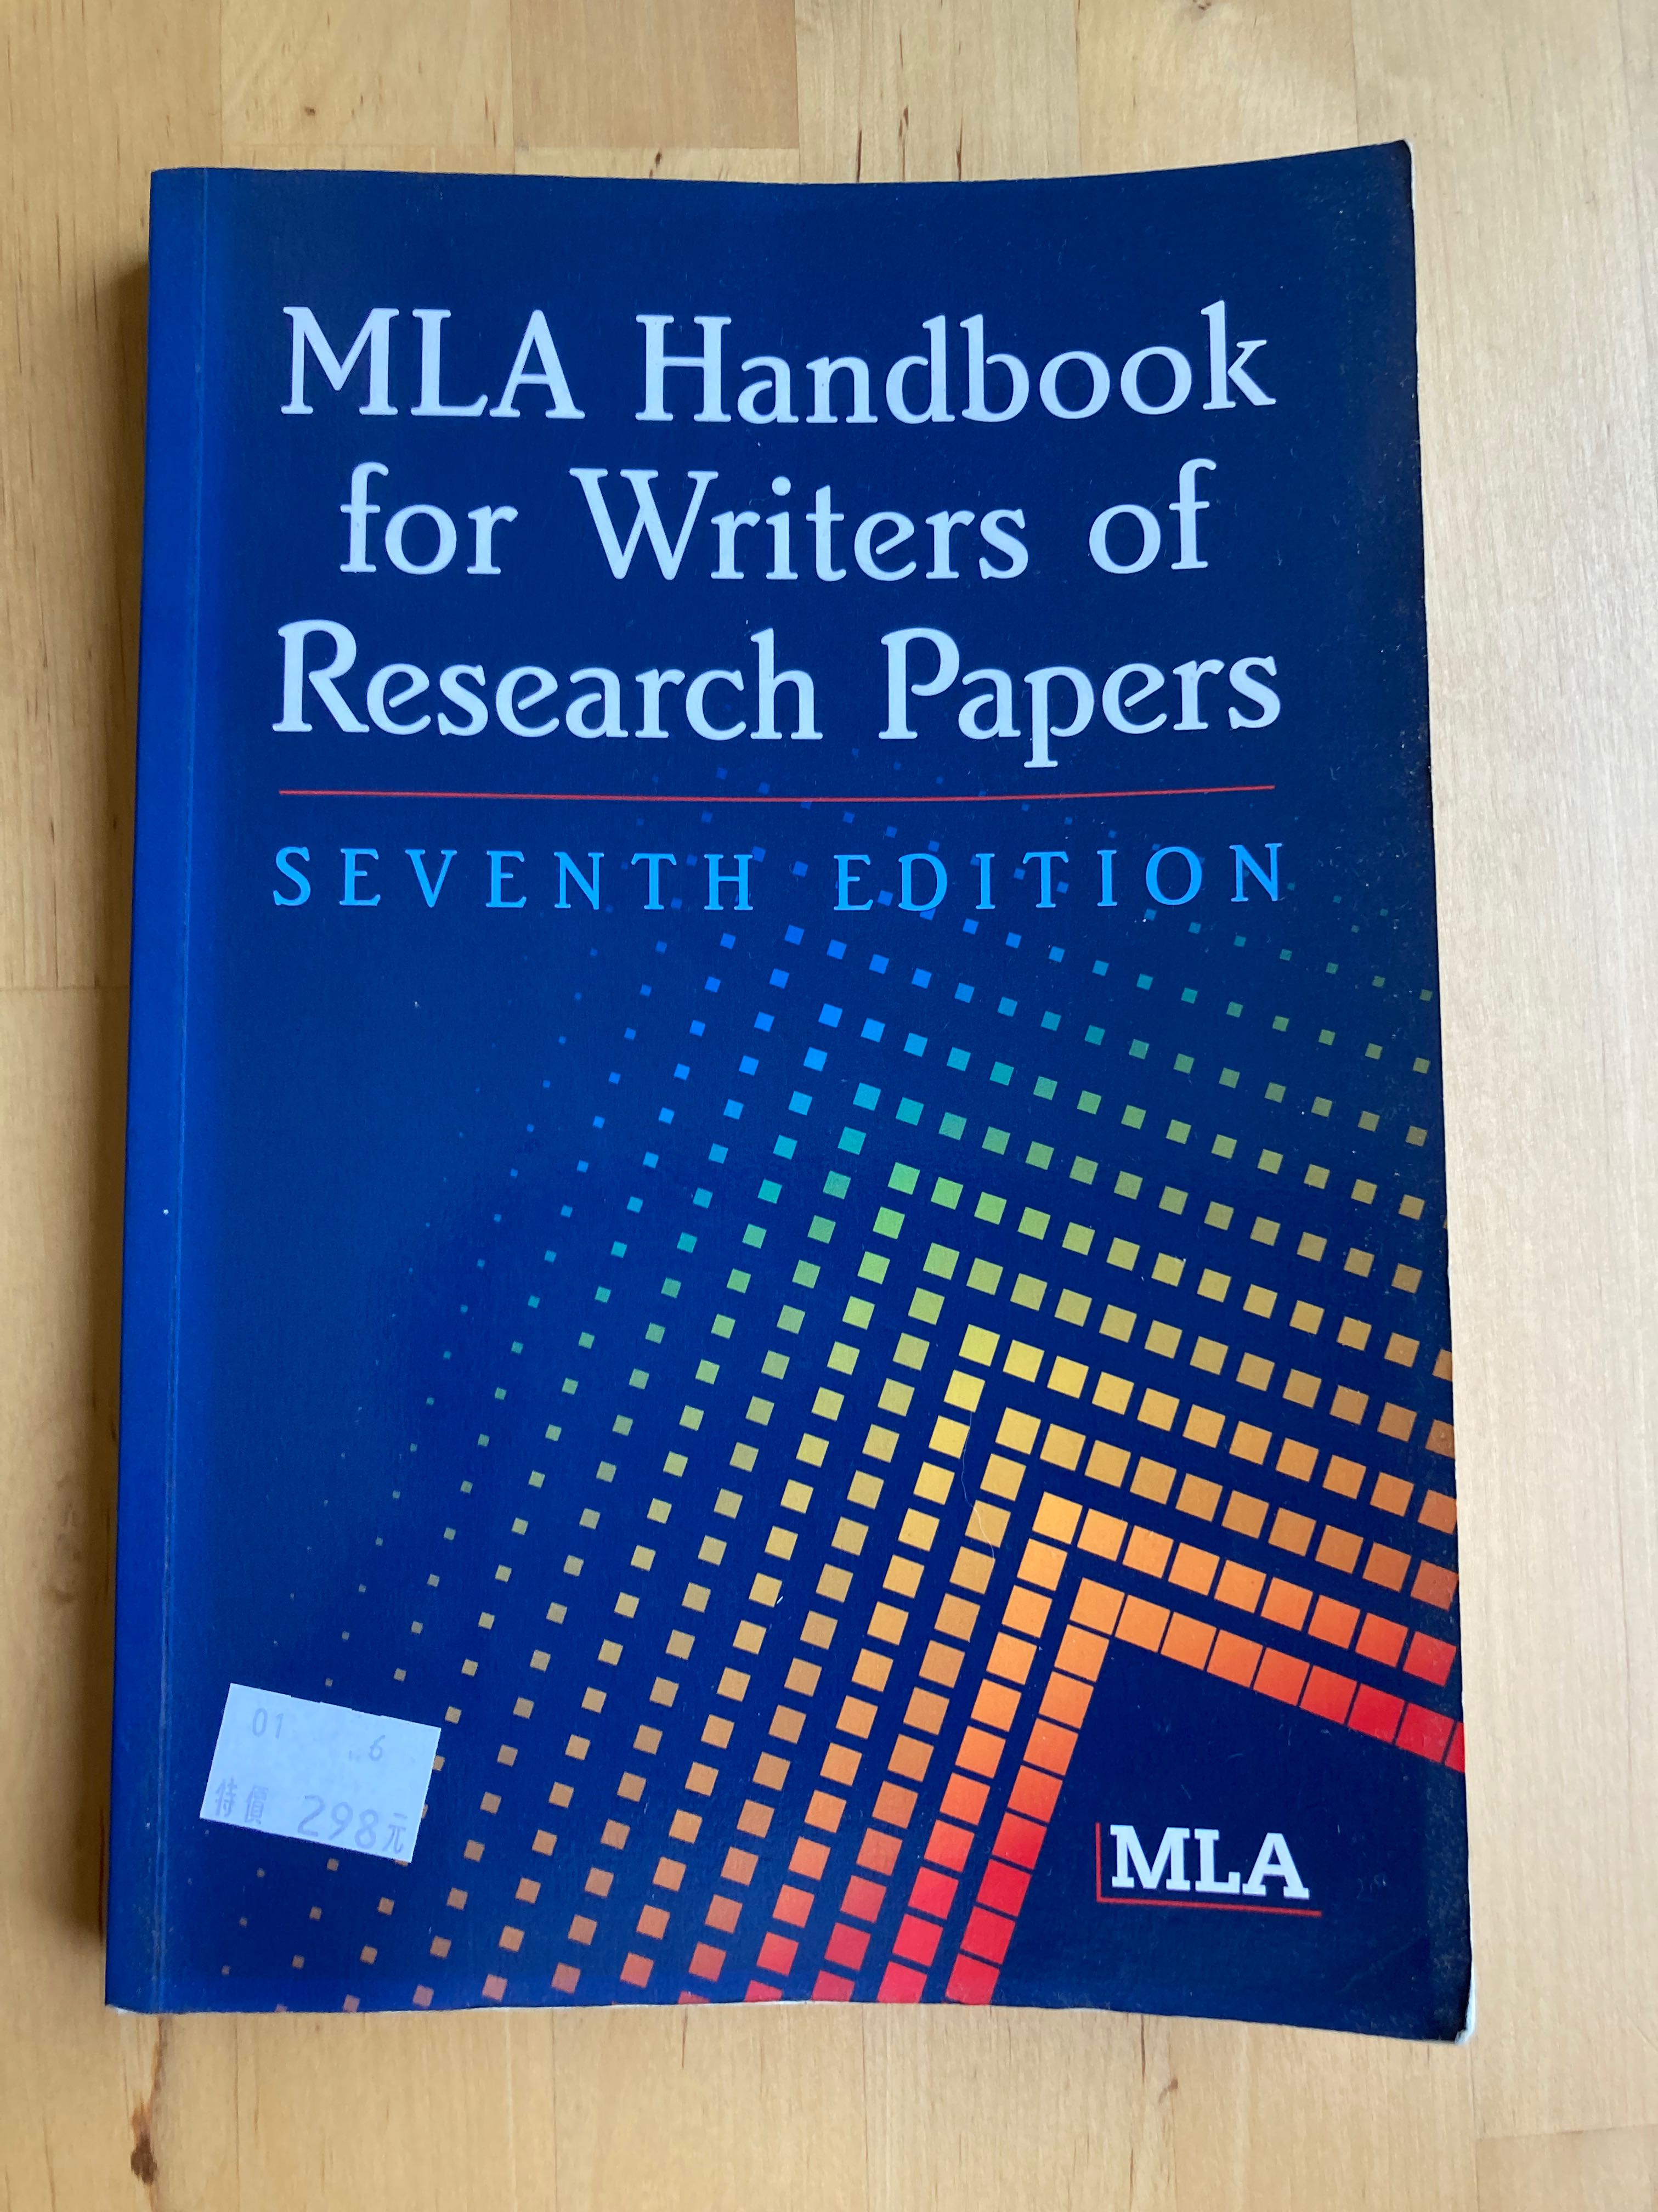 mla handbook for writers of research papers ninth edition